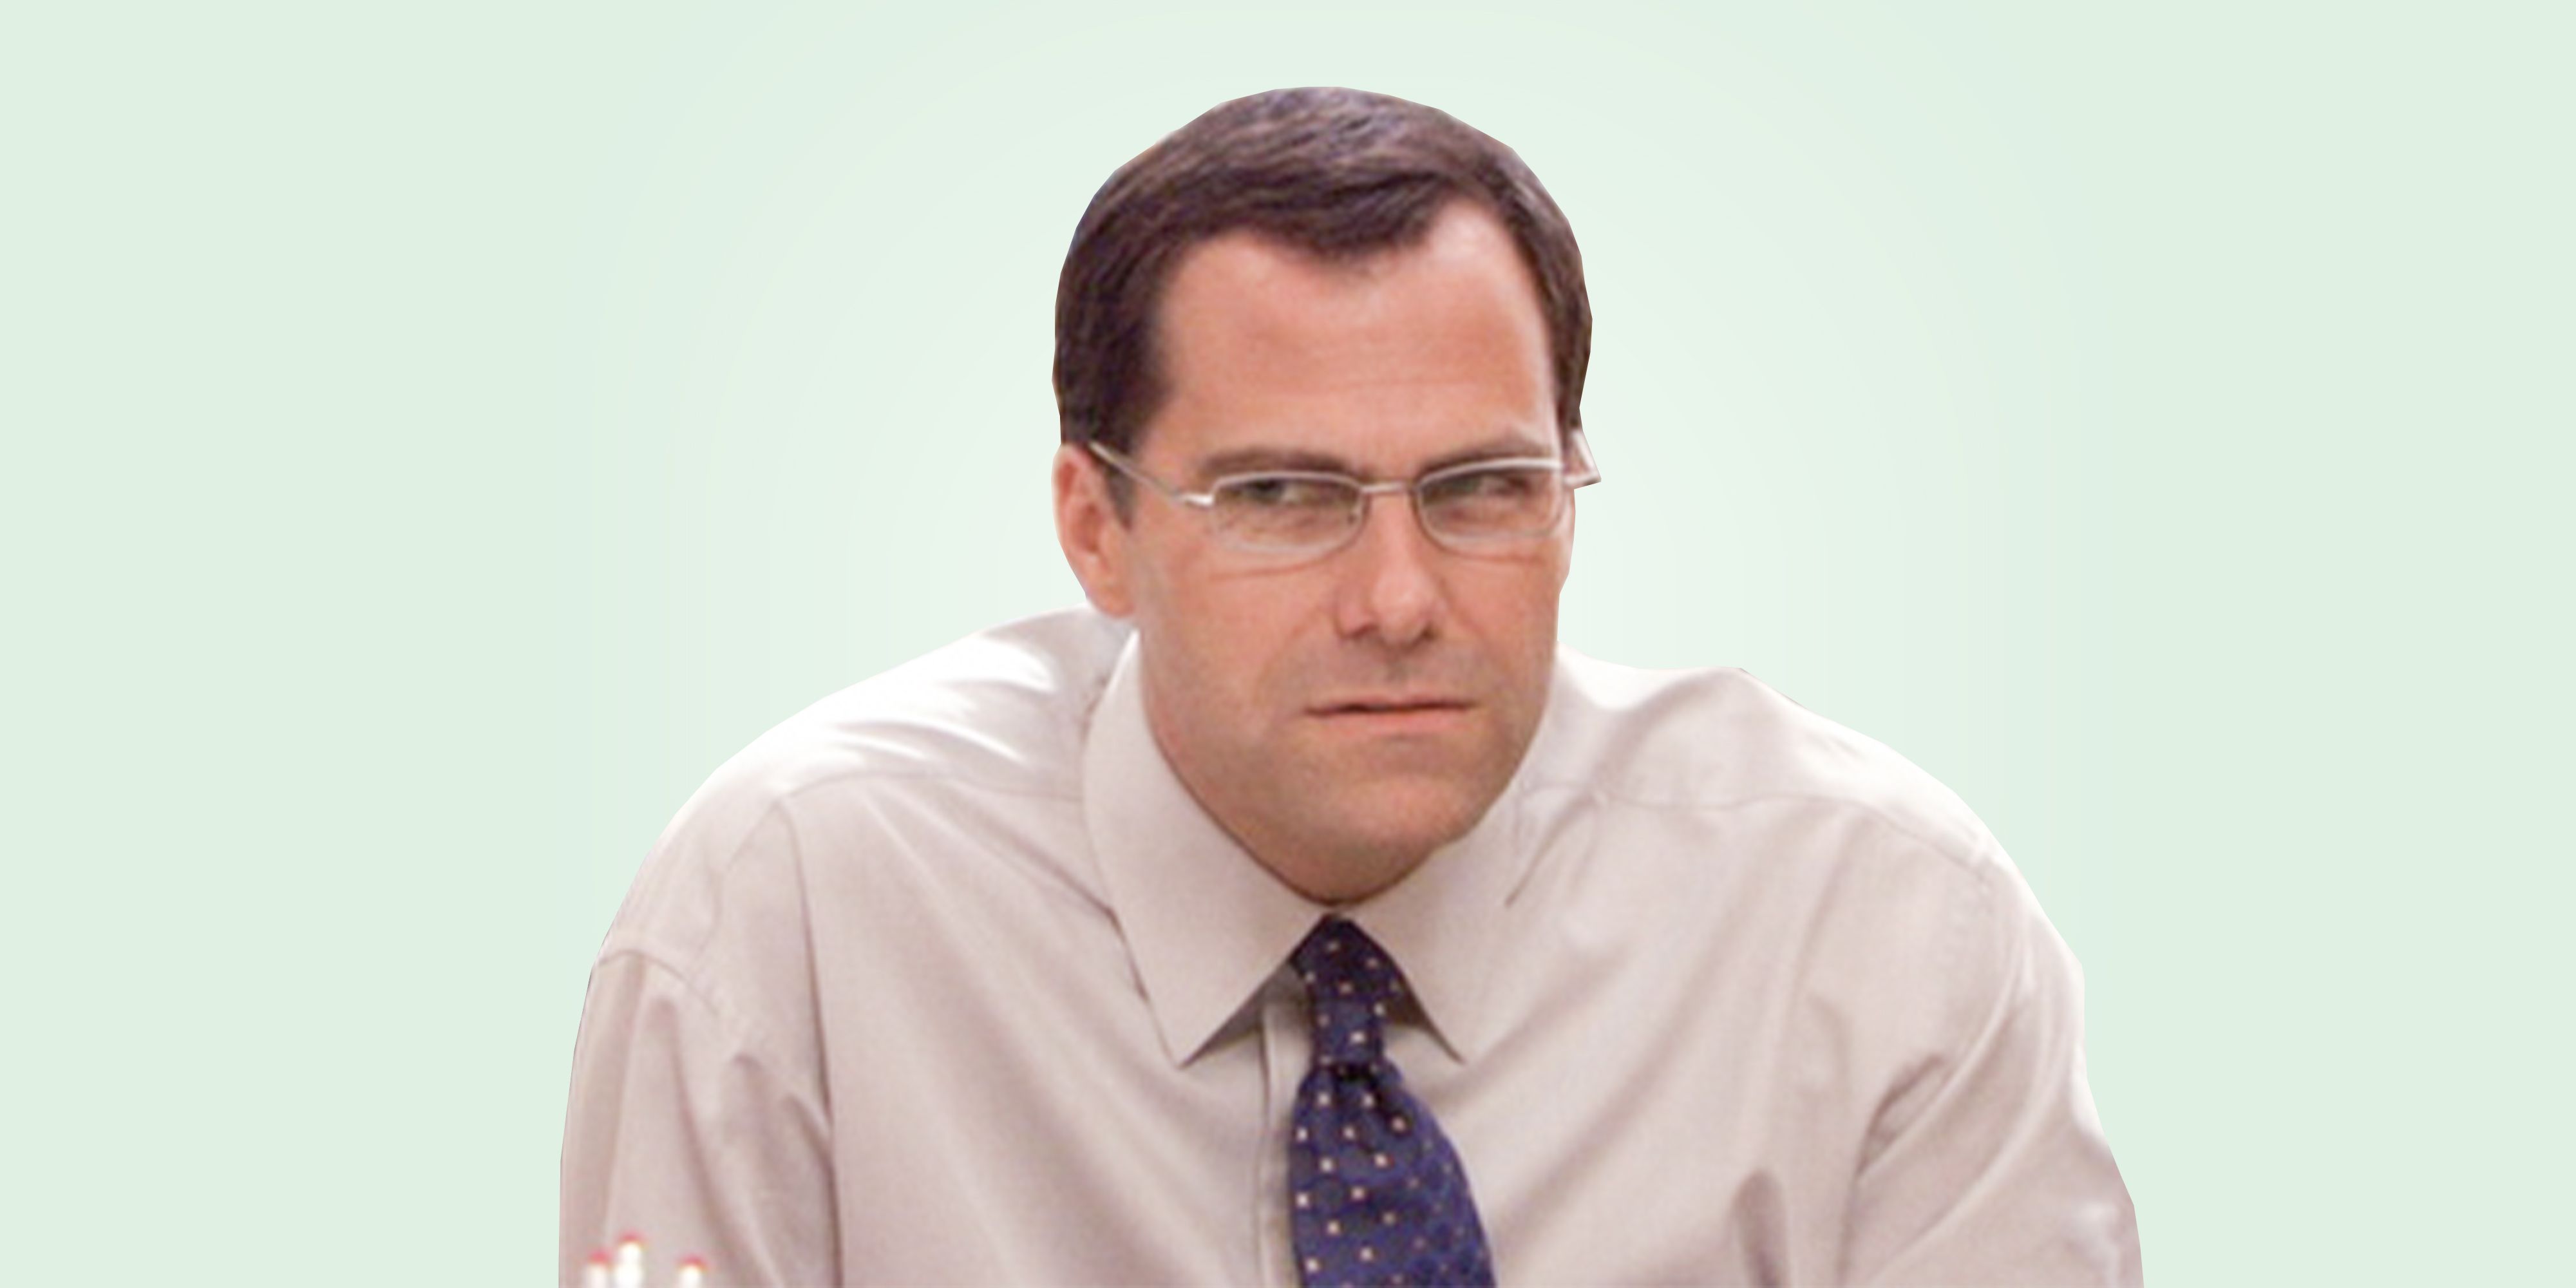 The Office Scranton Strangler Might Be David Wallace The Office S Biggest Mystery Solved